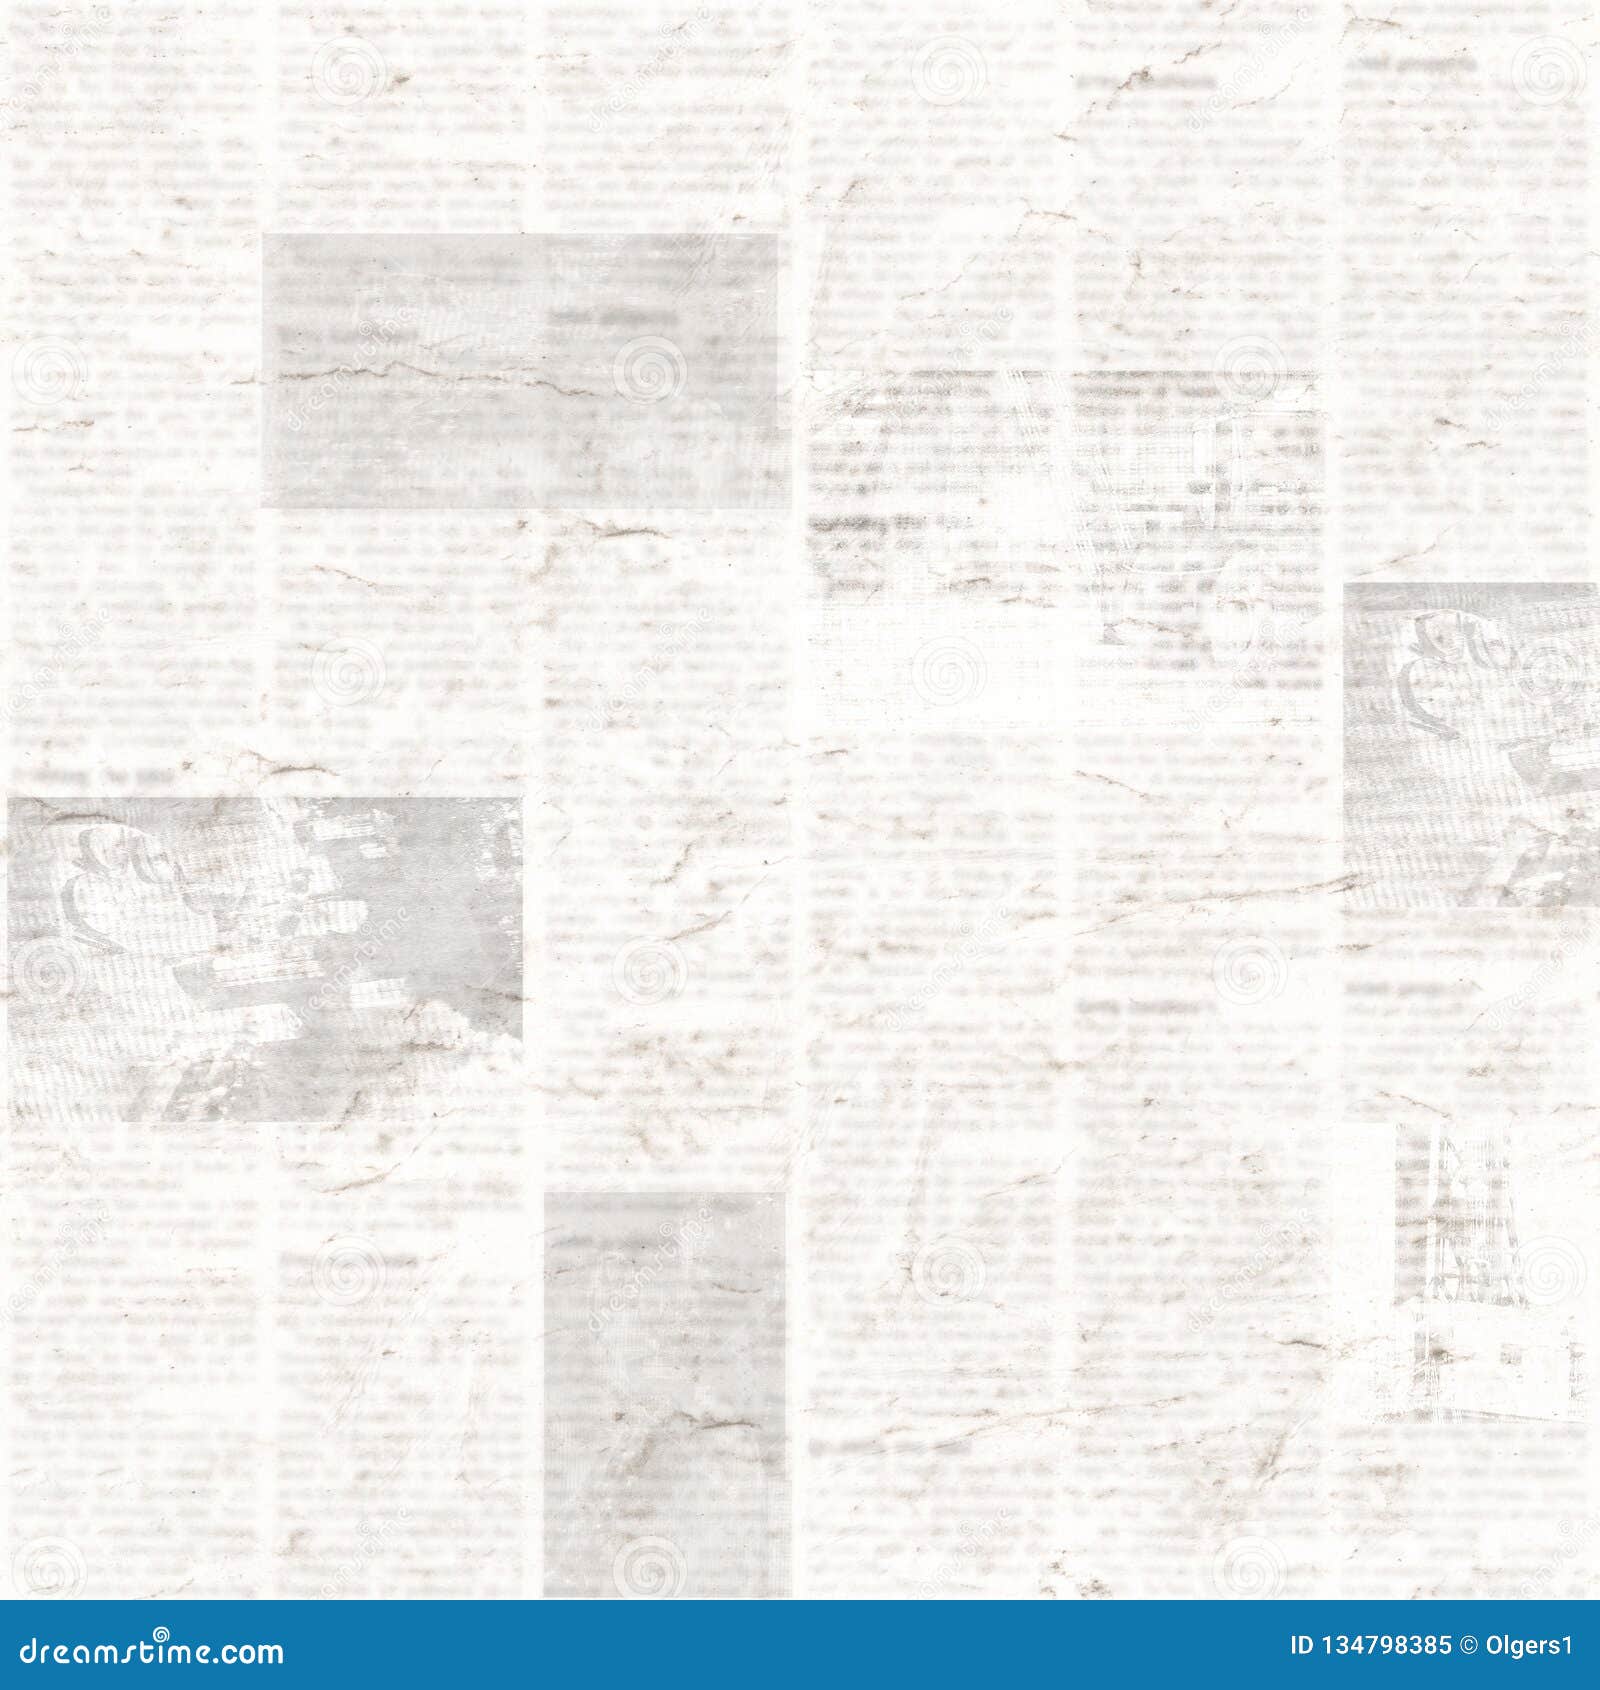 21 457 Seamless Old Paper Texture Photos Free Royalty Free Stock Photos From Dreamstime